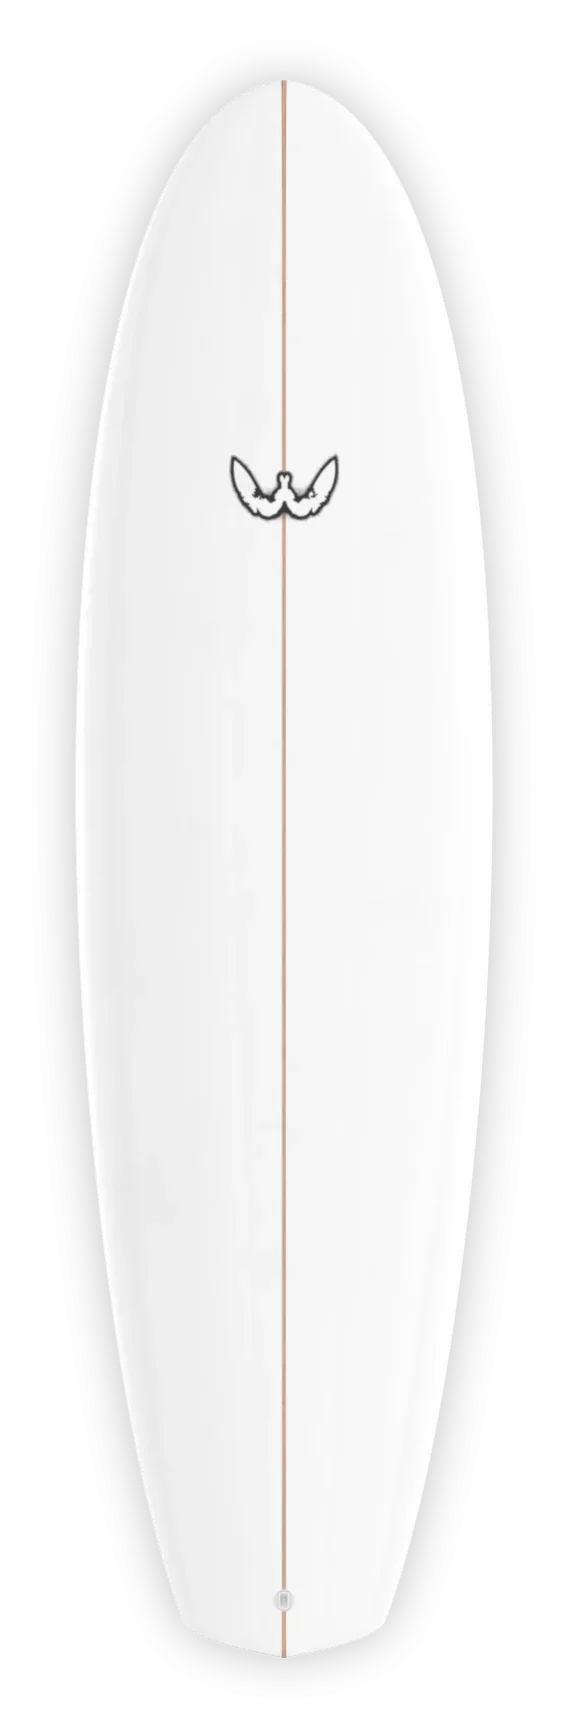 webber diamond beginner surfboard in all white with logo in the middle